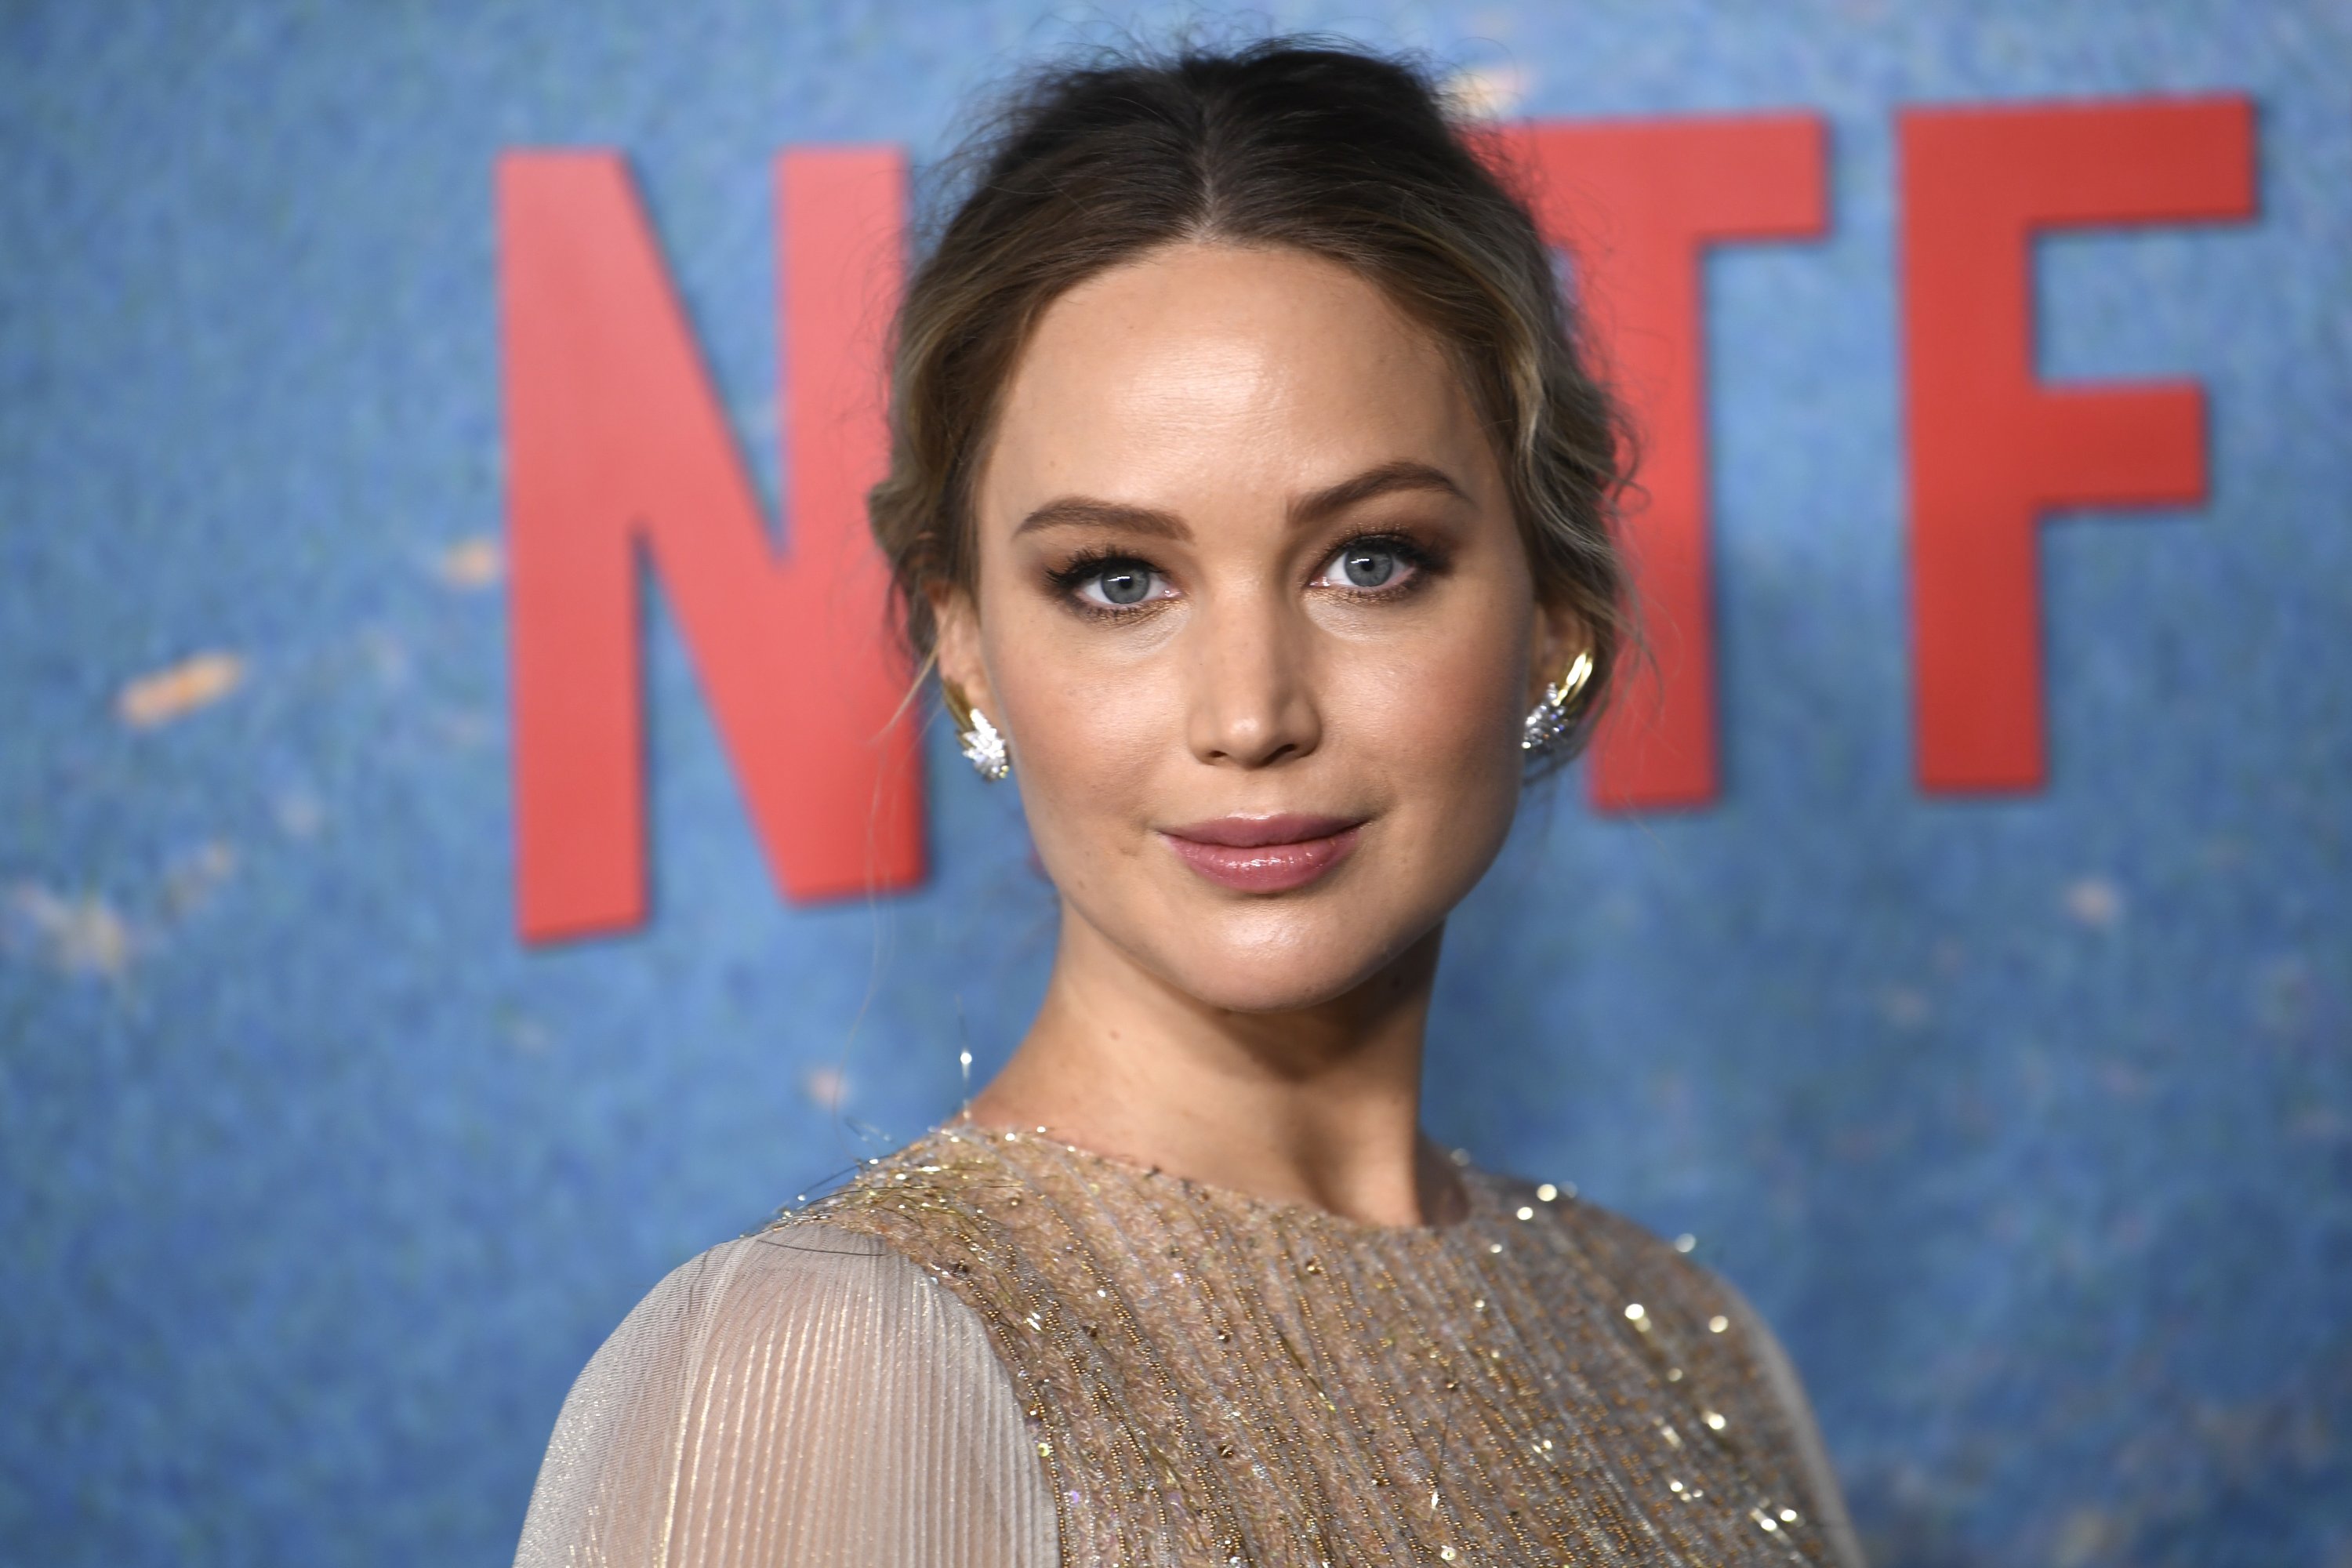 Jennifer Lawrence attends the world premiere of "Don't Look Up" at Jazz at Lincoln Center in New York, U.S., Dec. 5, 2021. (AP)